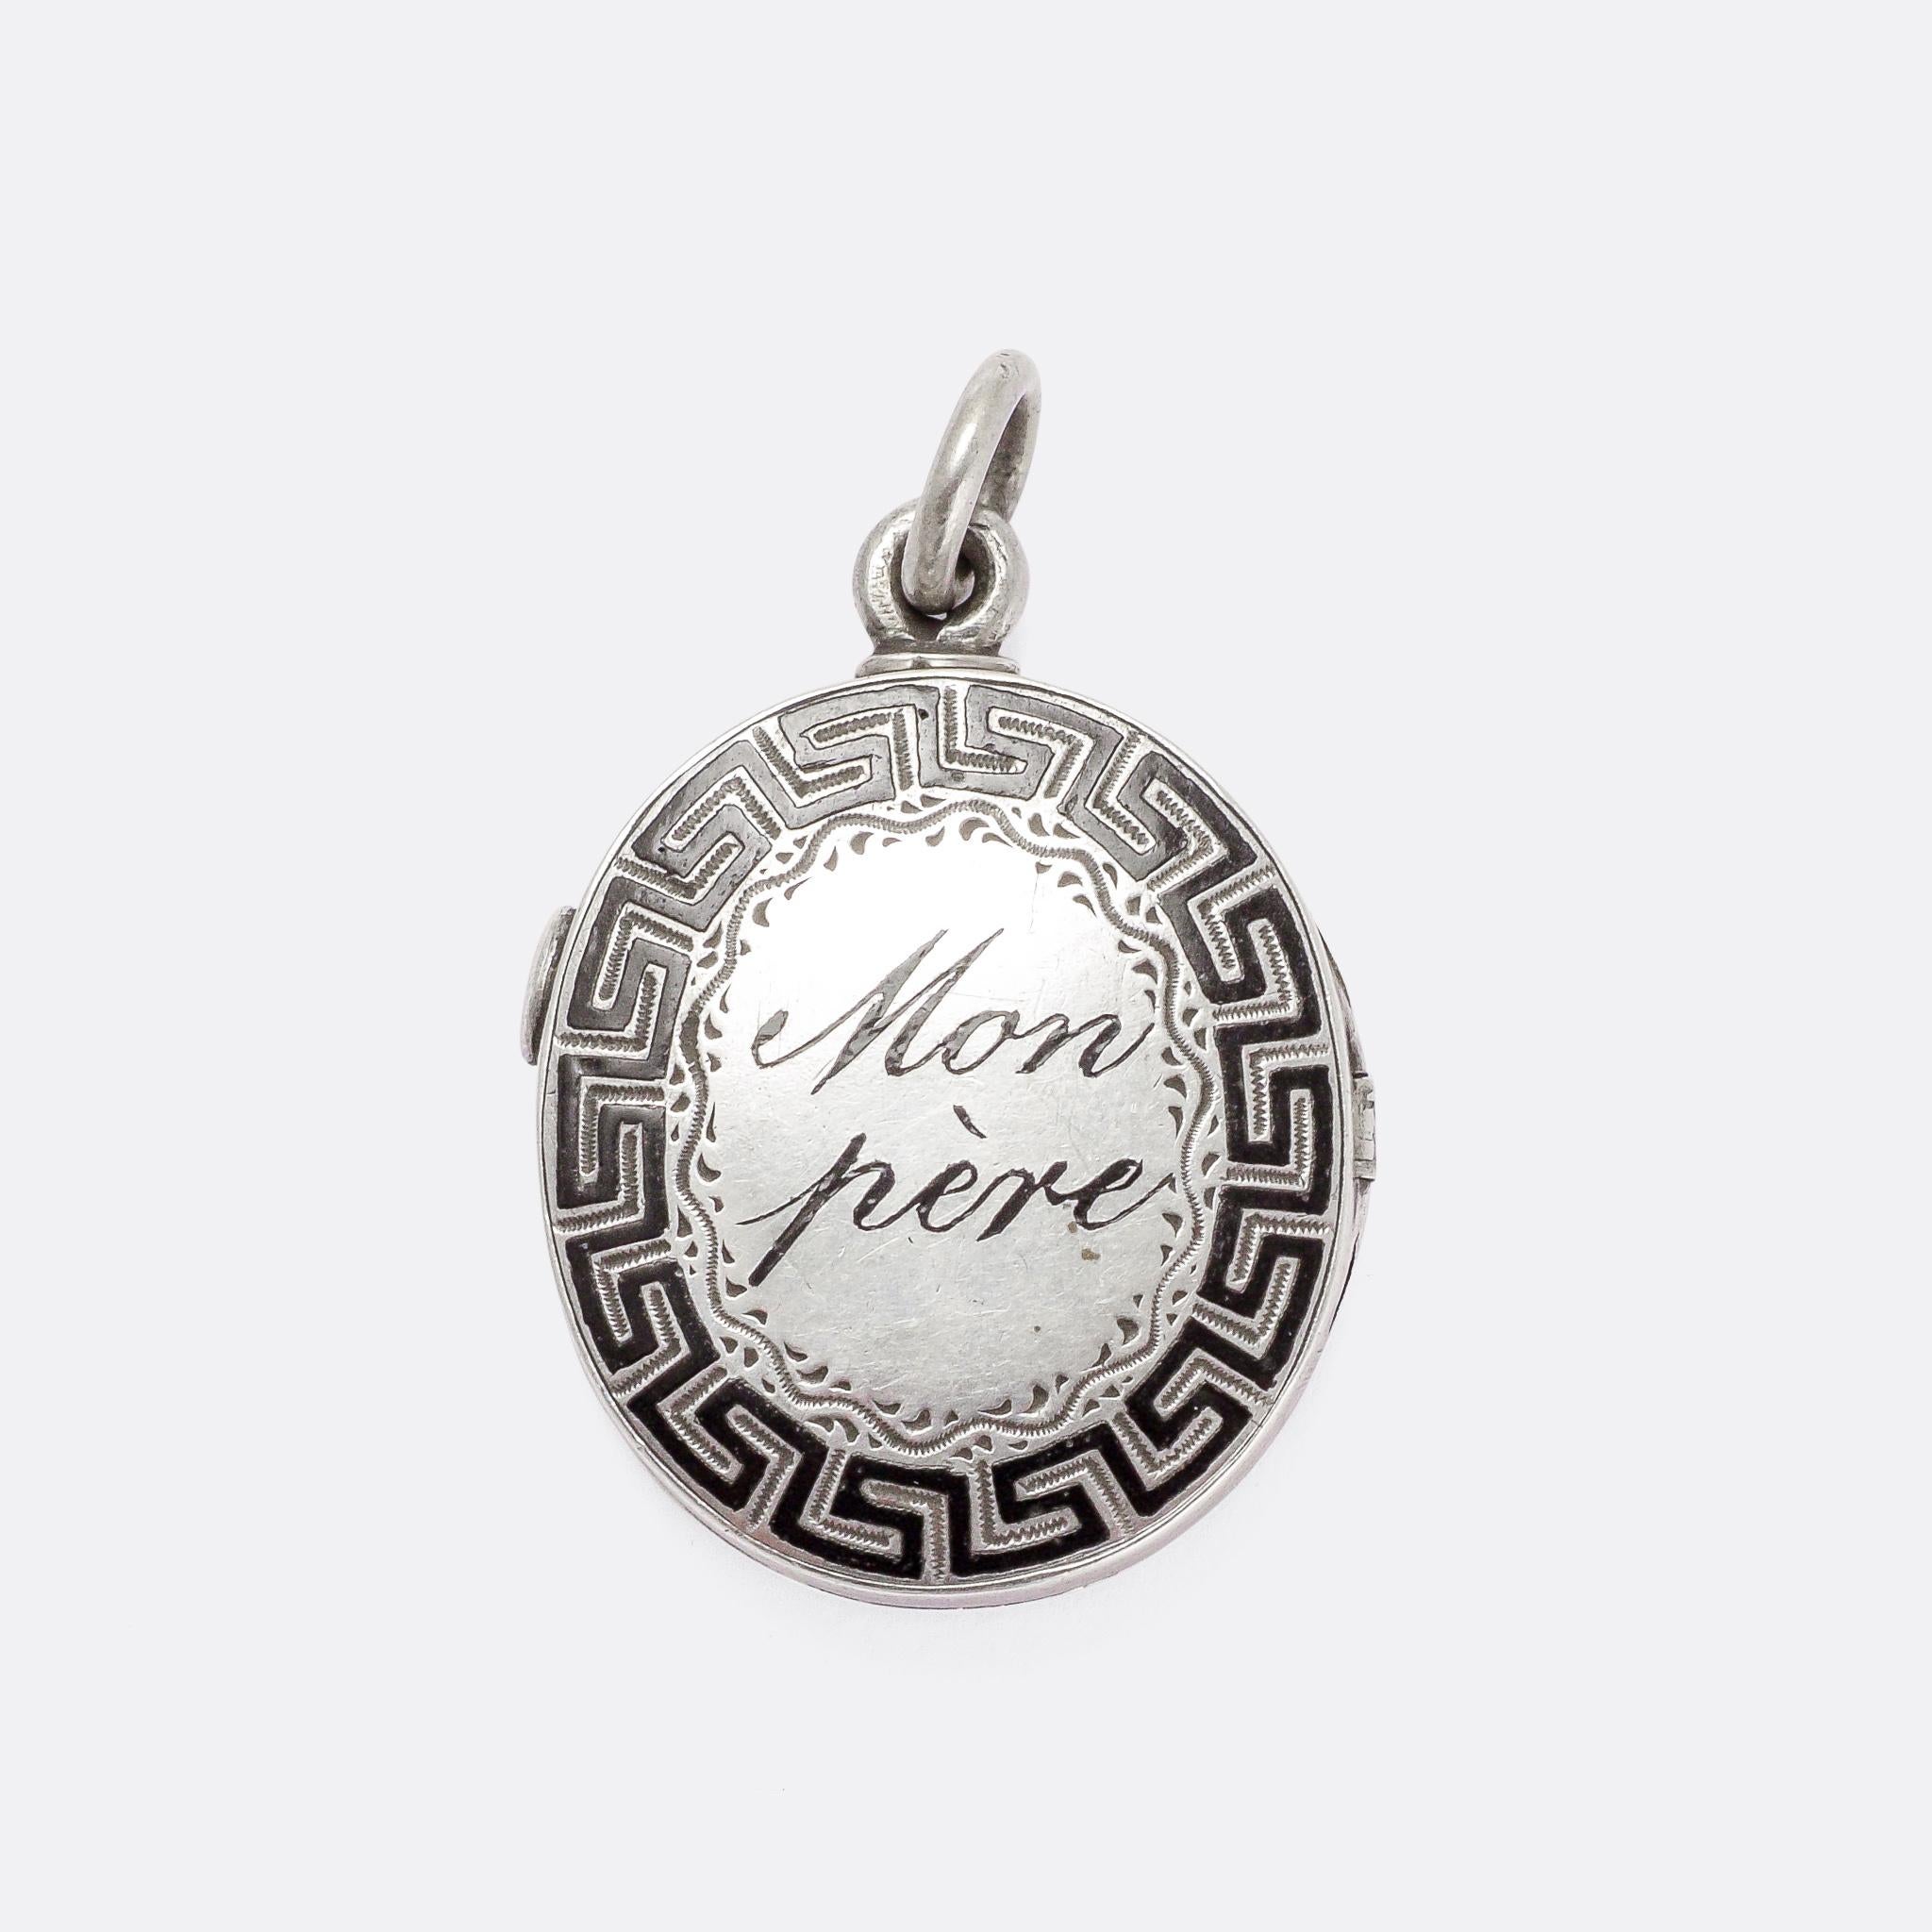 Such a cool antique locket dating from the mid Victorian era, circa 1870. It features a Greek key border around the words Ma Mère [my mother] on one side, and Mon Père [my father] on the other. It opens to reveal two oval locket compartments